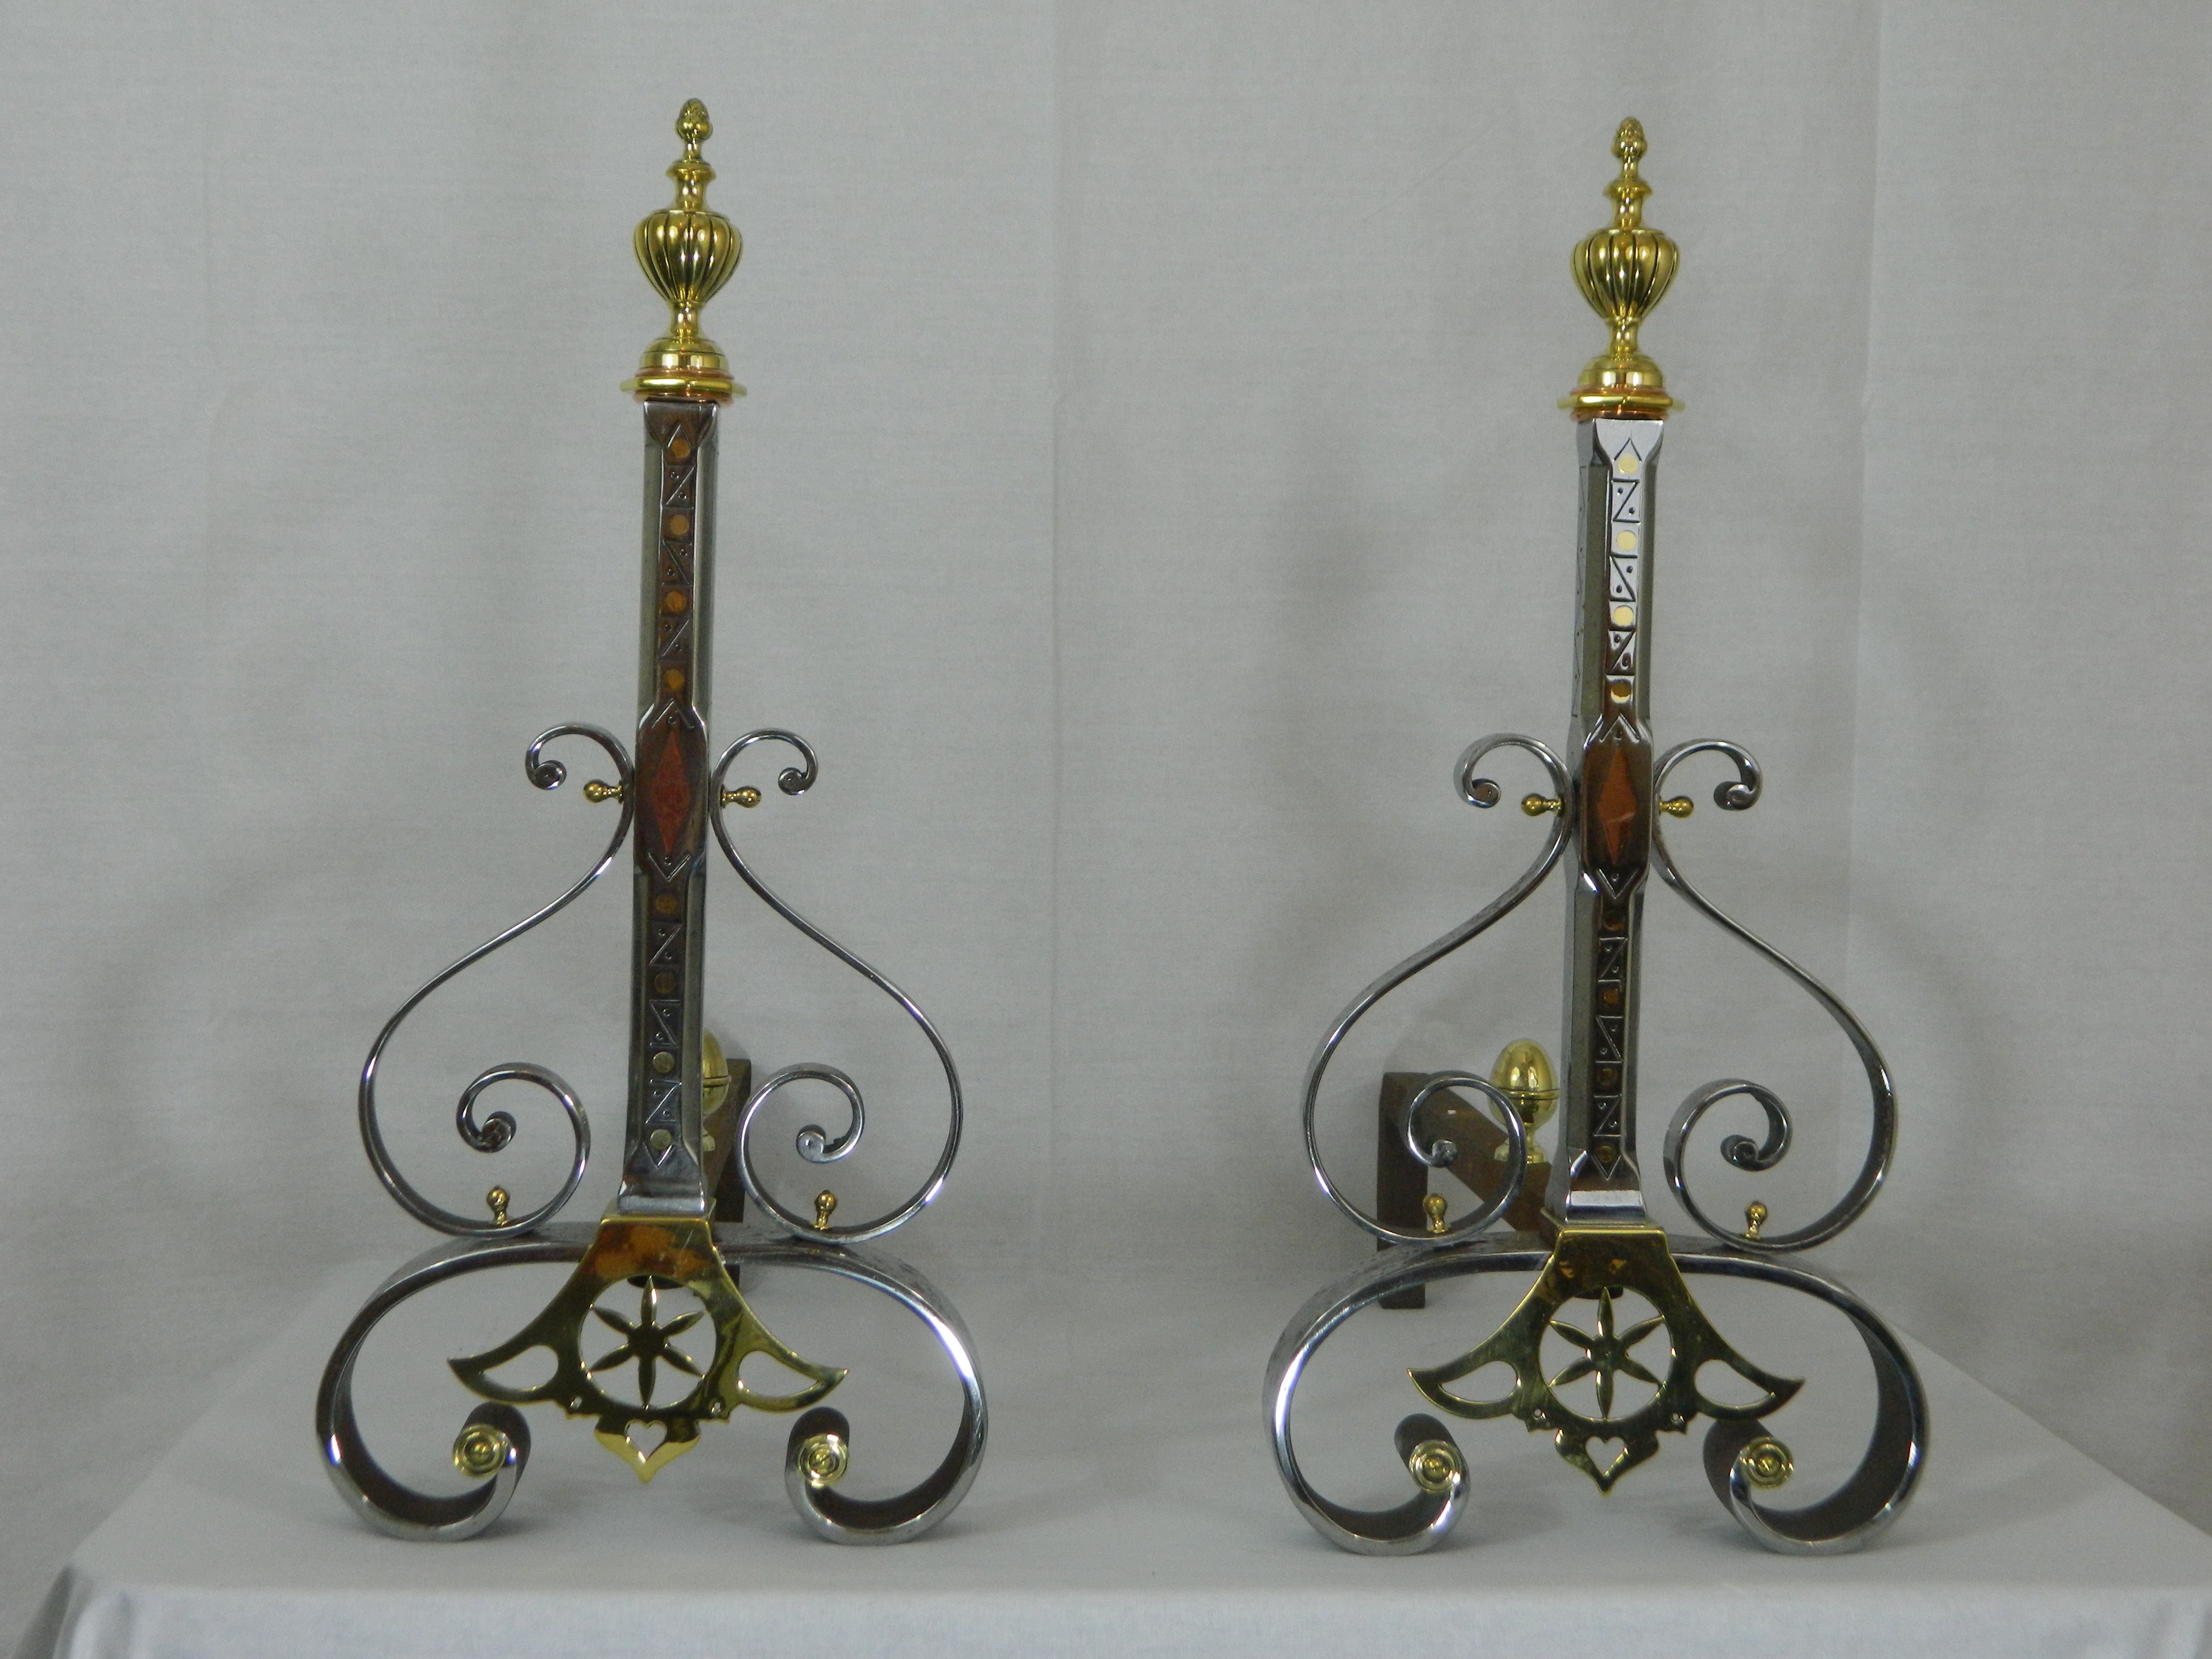 Pair of Iron, Copper and Brass Chenets or Andirons, 19th Century